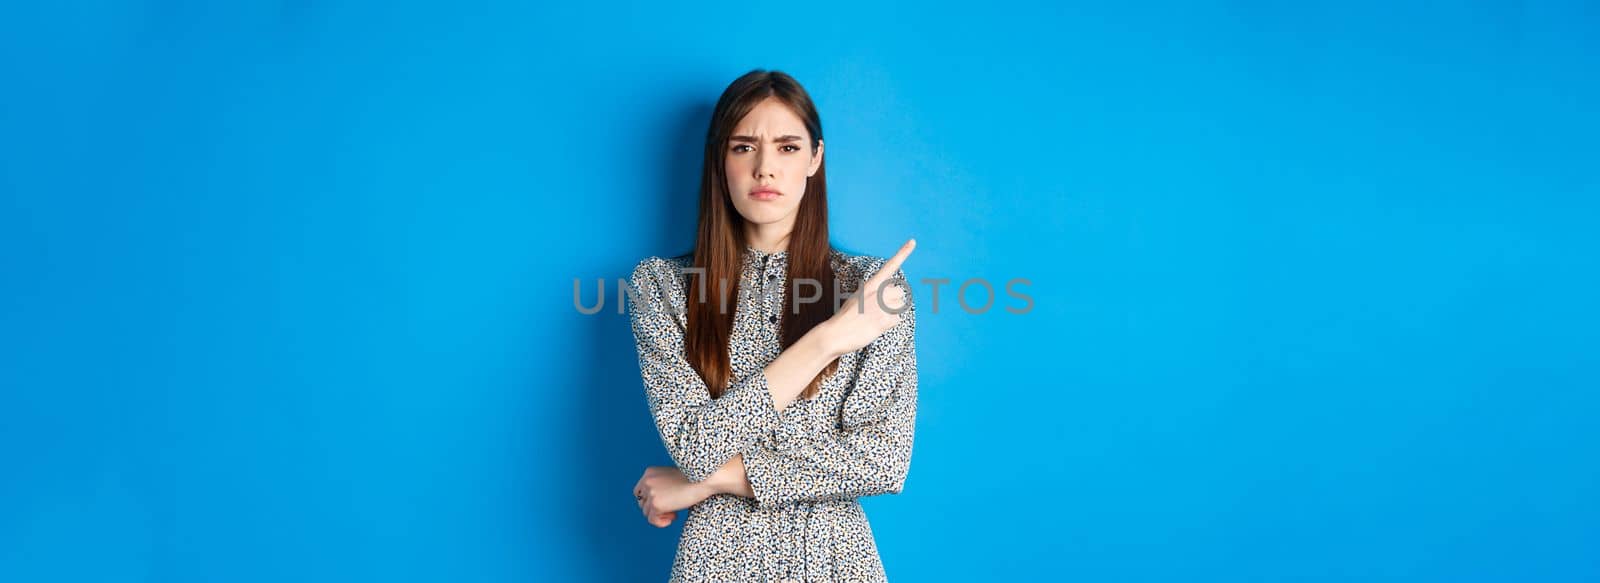 Disappointed frowning girl pointing left and looking displeased, condemn something bad, complaining at banner, standing against blue background in dress.